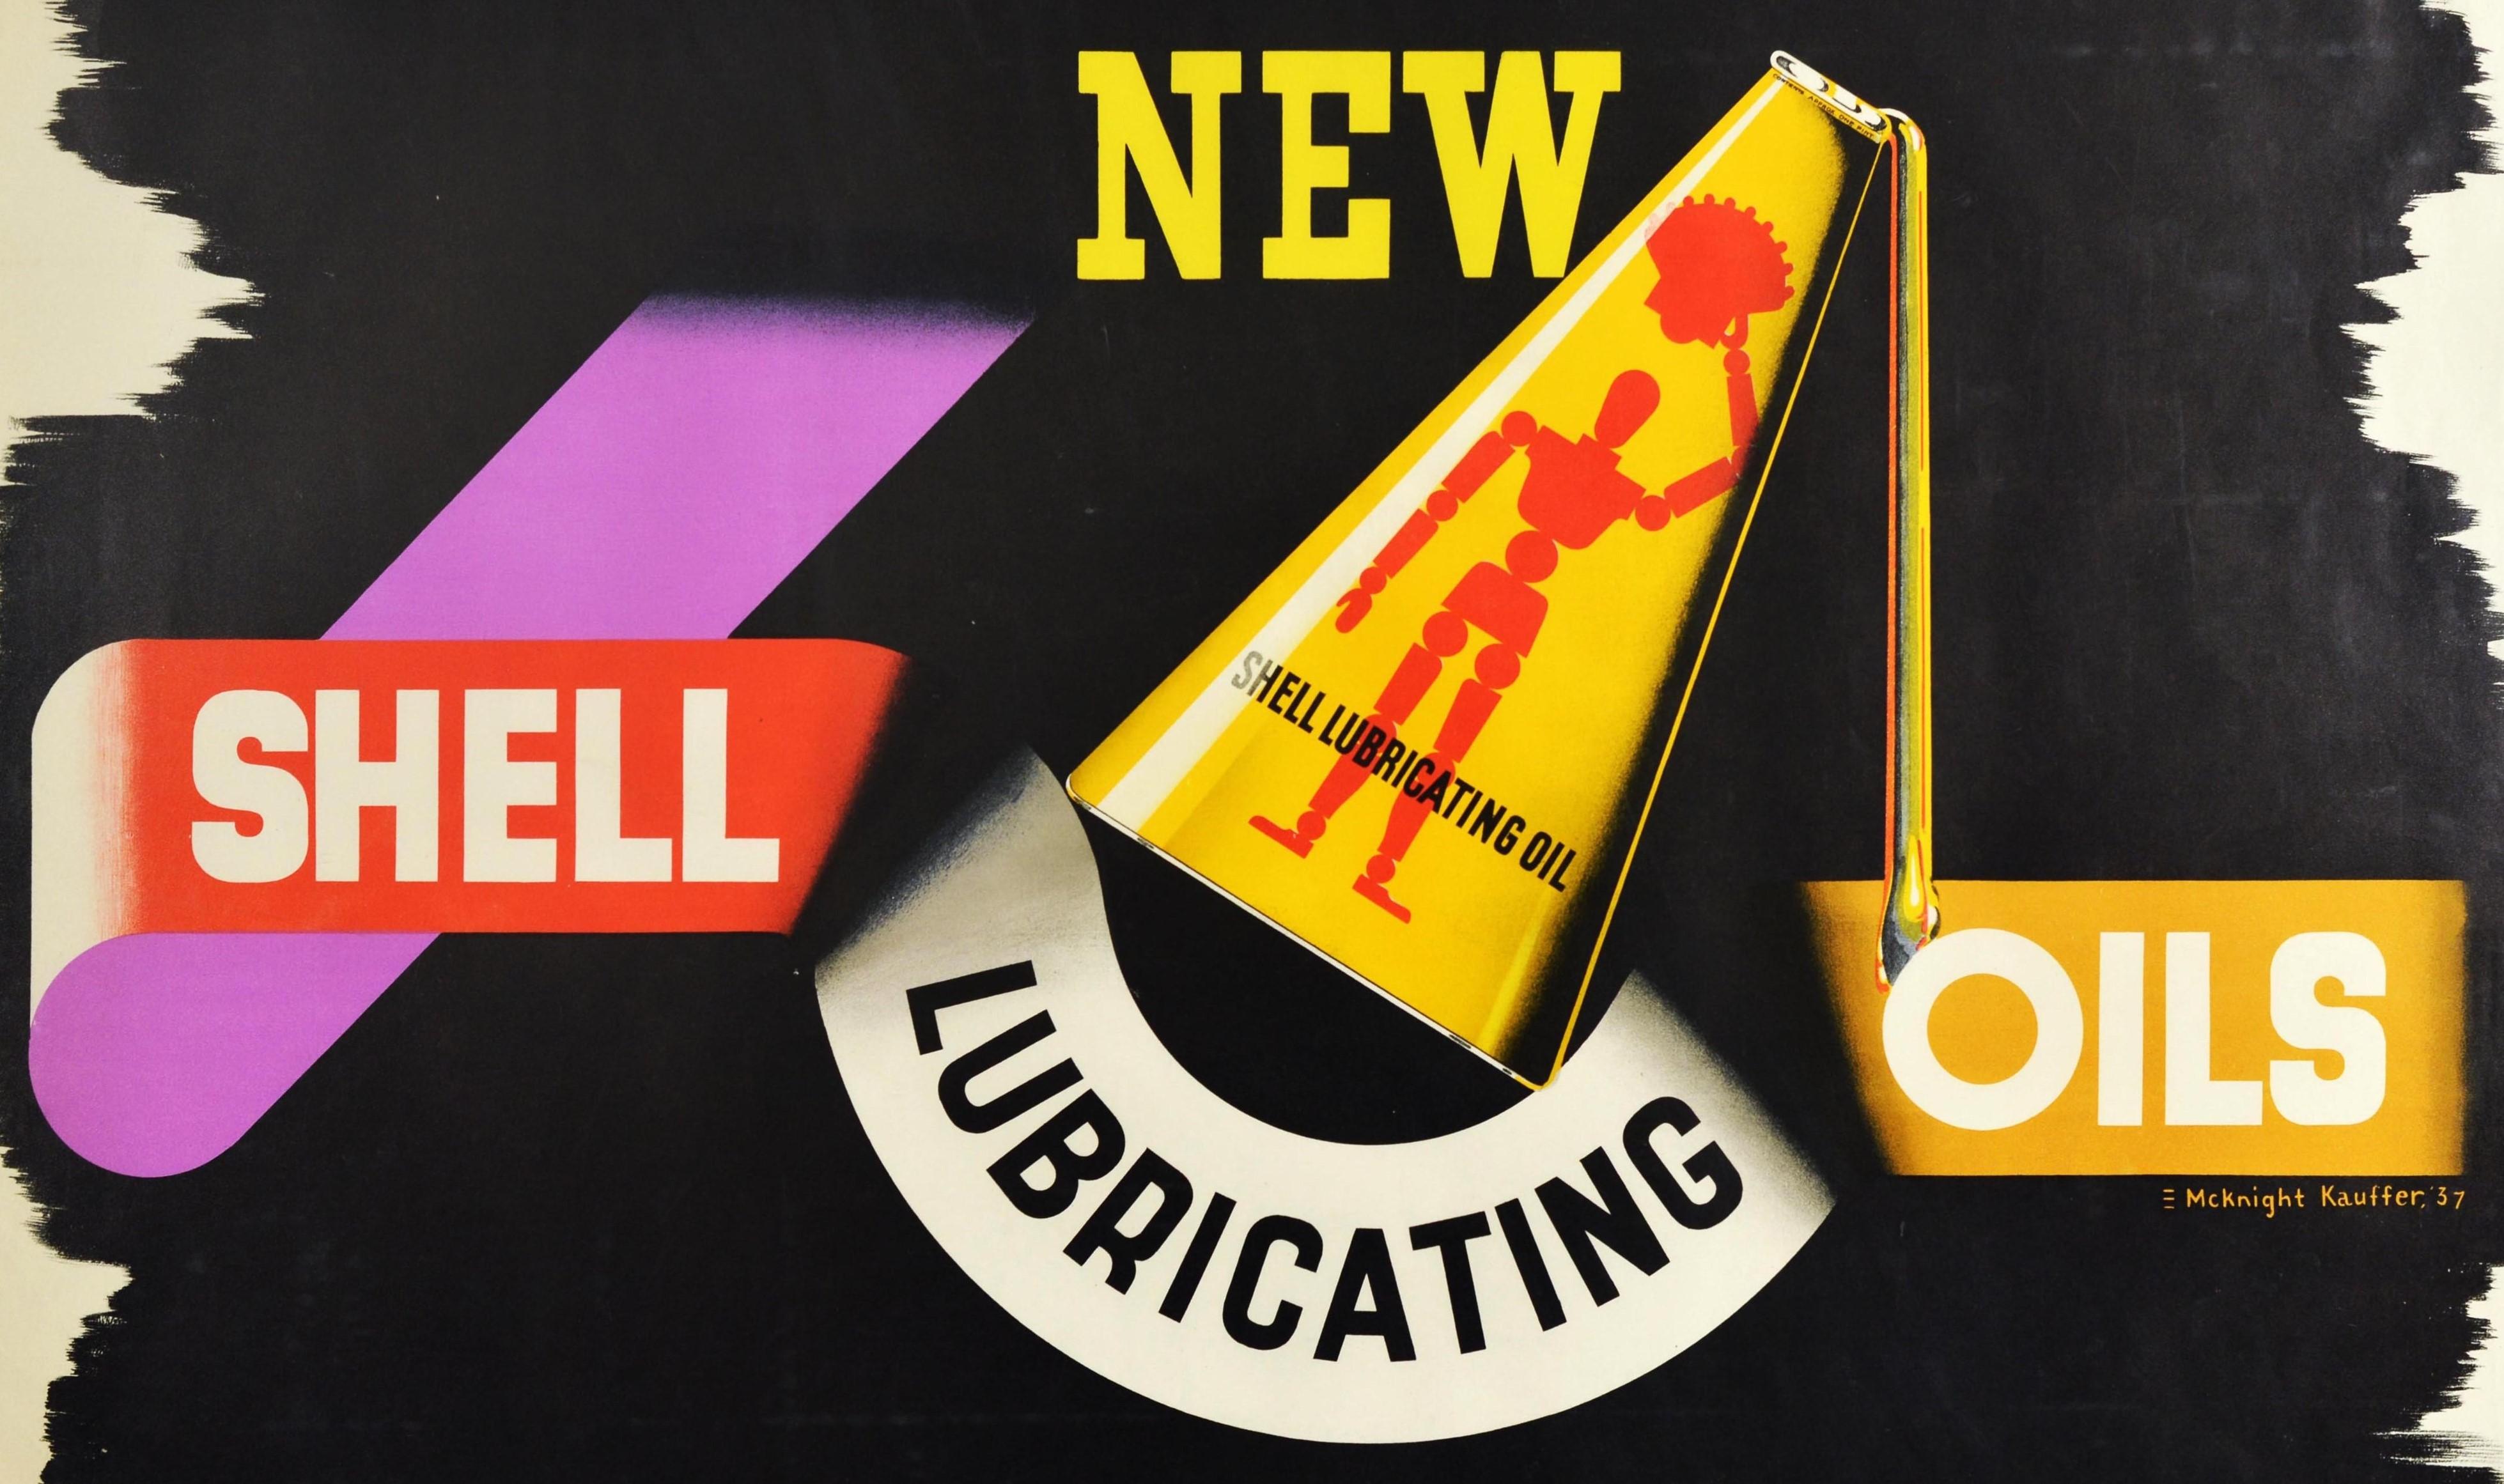 Original Vintage Poster New Shell Lubricating Oils Motor Oil Can Logo Mannequin - Print by Edward McKnight Kauffer